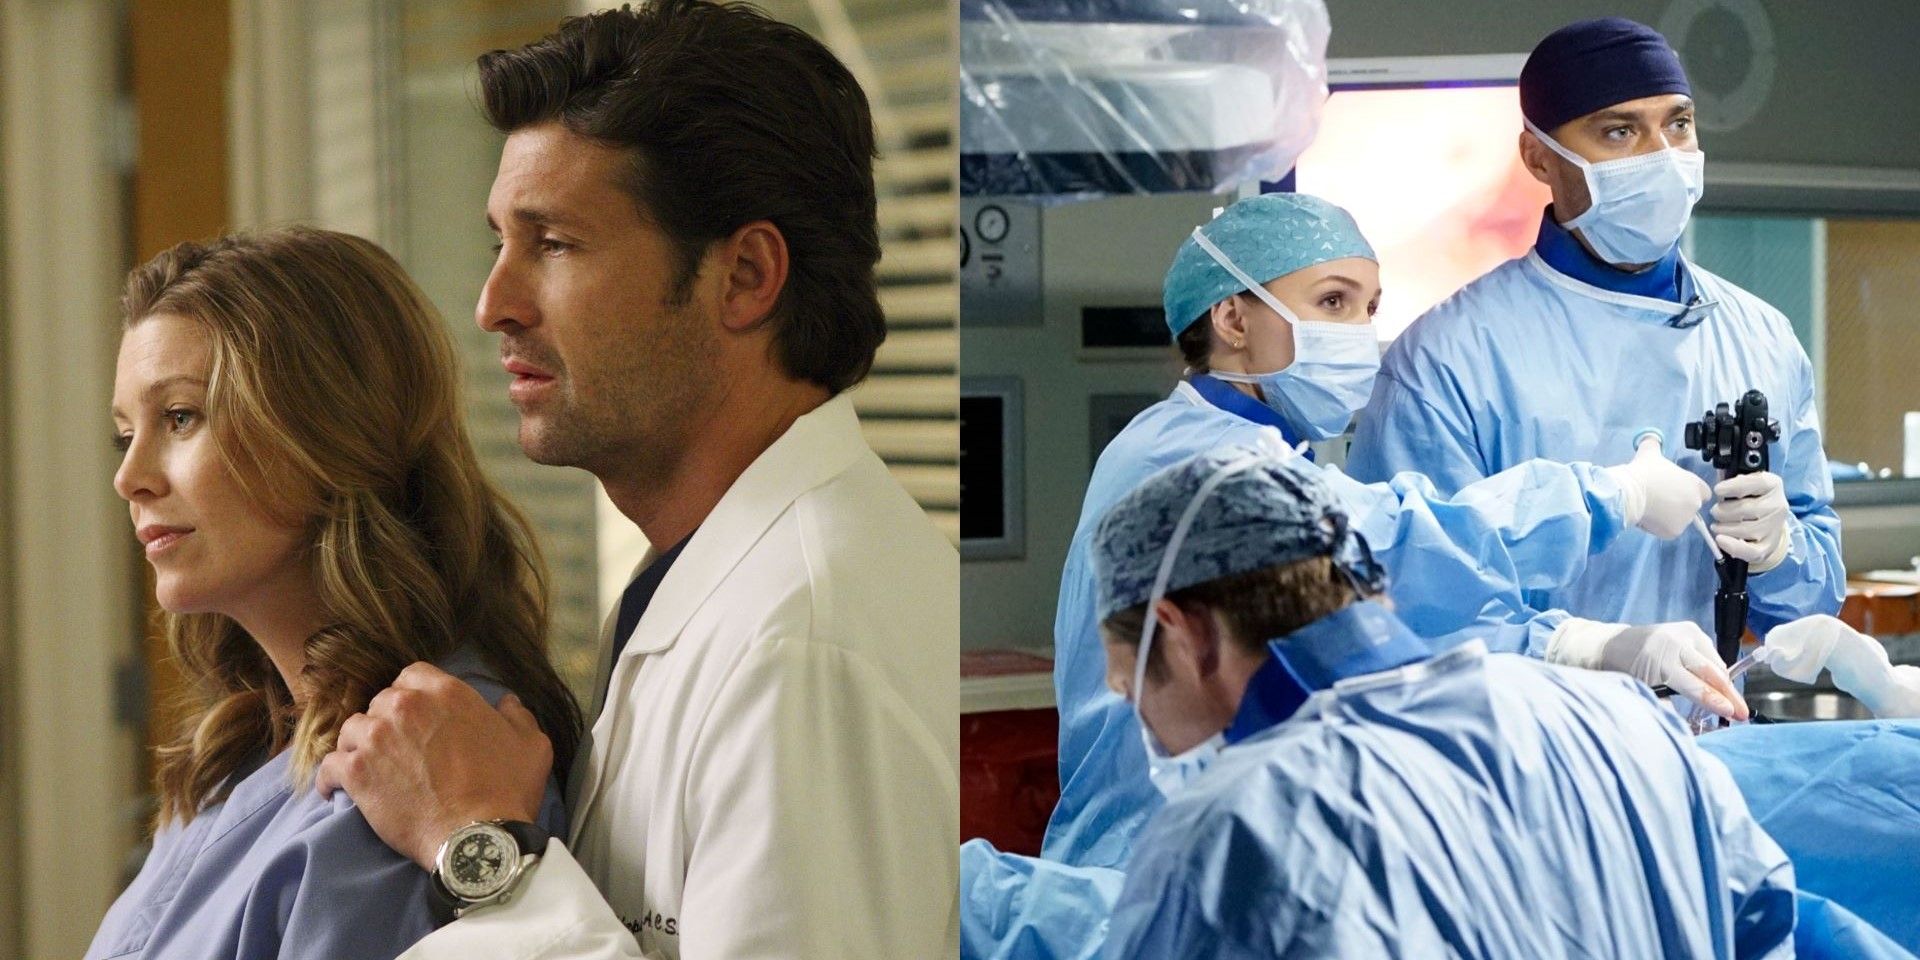 Grey's Anatomy questionable workplace choices.